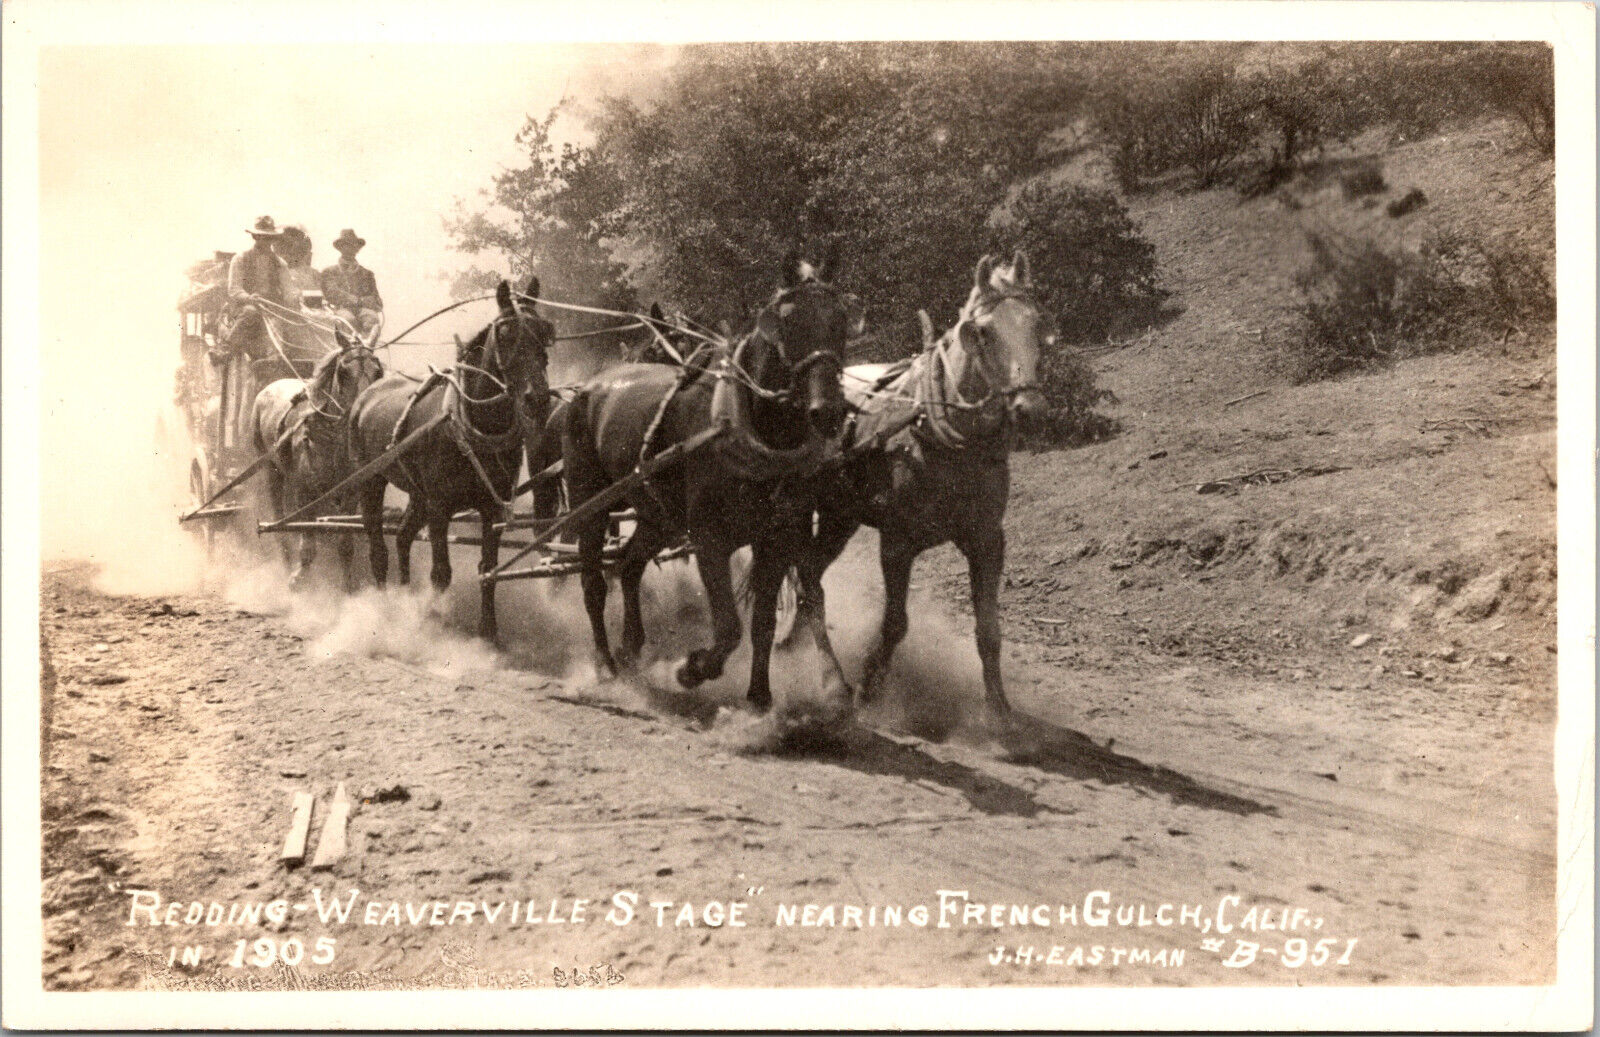 1905 Redding Weaverville Stage Coach Horses French Gulf CA Postcard RPPC Vtg